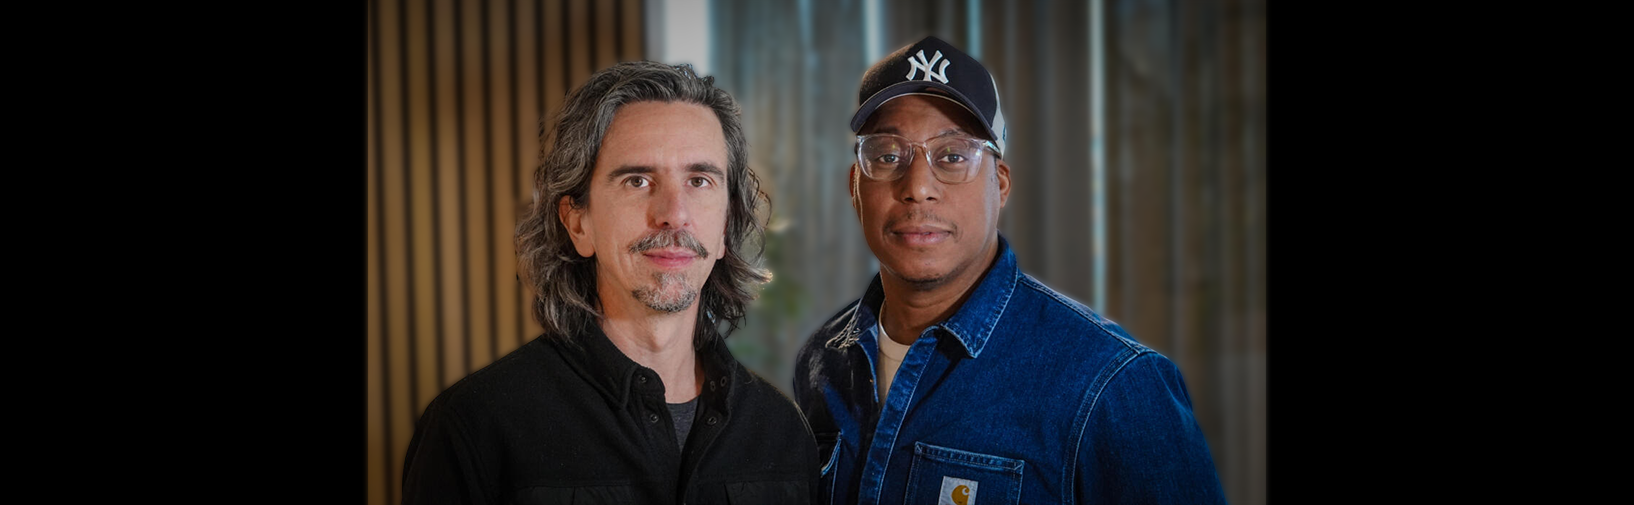 New breeze blows through NL Film; Dennis Cornelisse appointed Managing Director and Wynand Chocolaad recruited as Head of Productions hero image